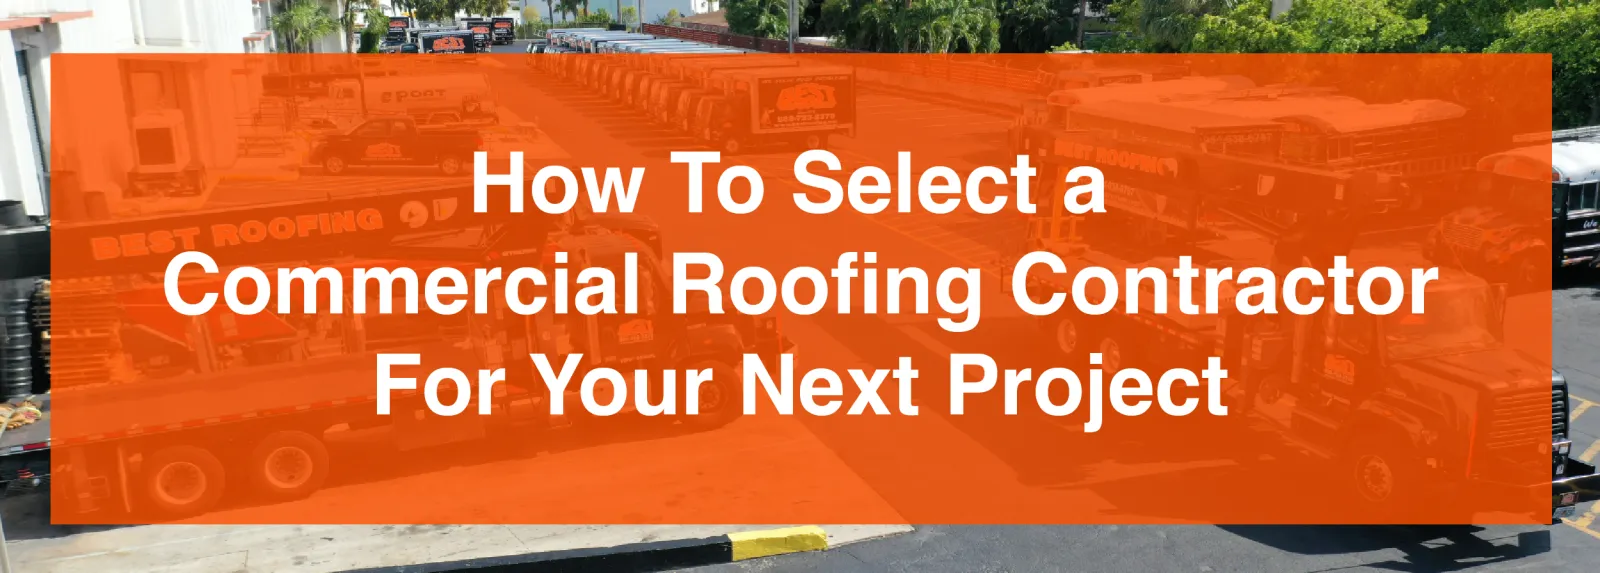 How to select a commercial roofing contractor for your next project